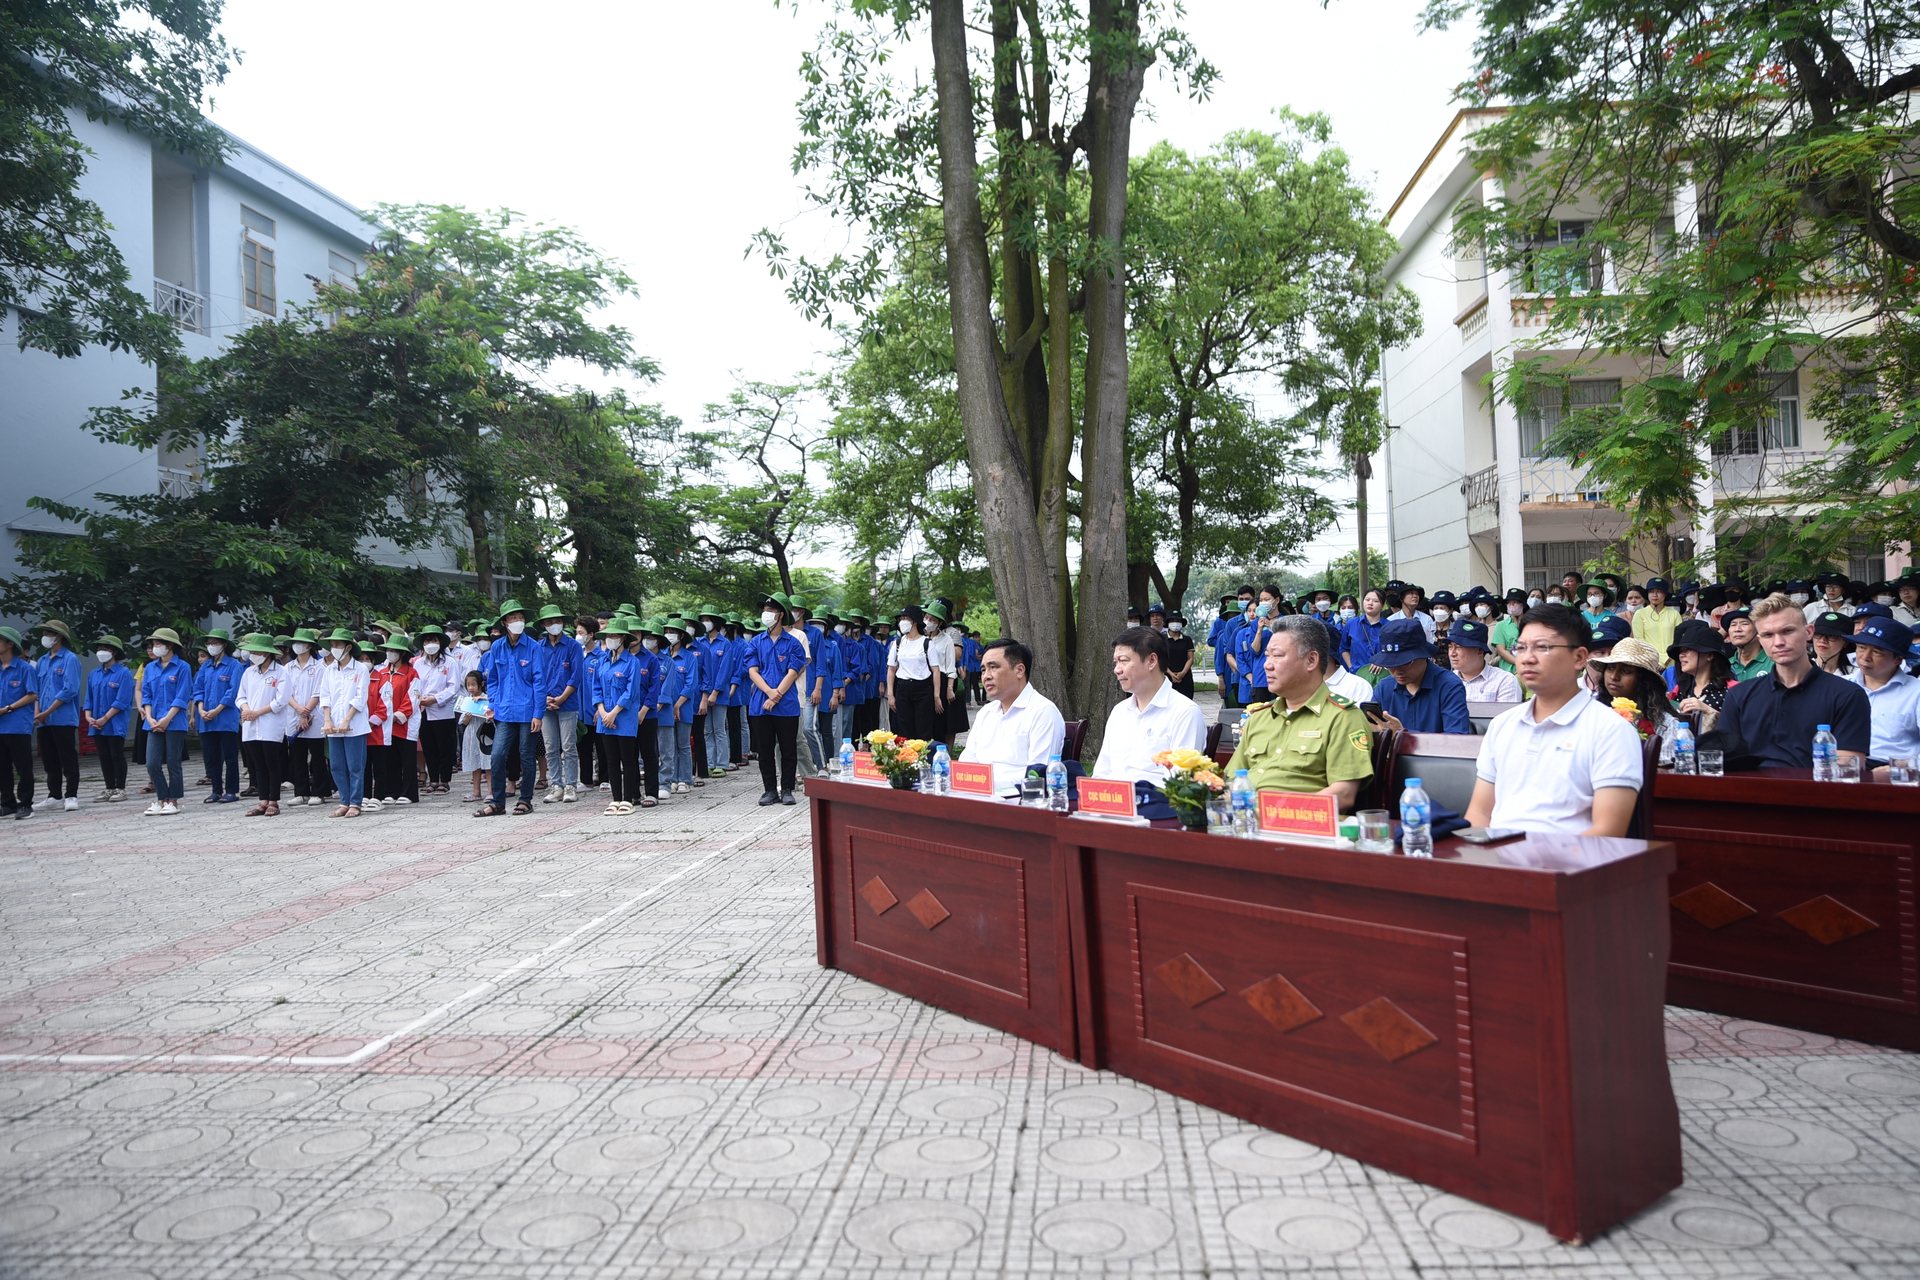 Delegates and a large number of students from Bac Giang Agriculture and Forestry University and students from Than Nhan Trung High School attended the meeting to respond to the International Day against Desertification and Drought in 2023. Photo: Pham Hieu